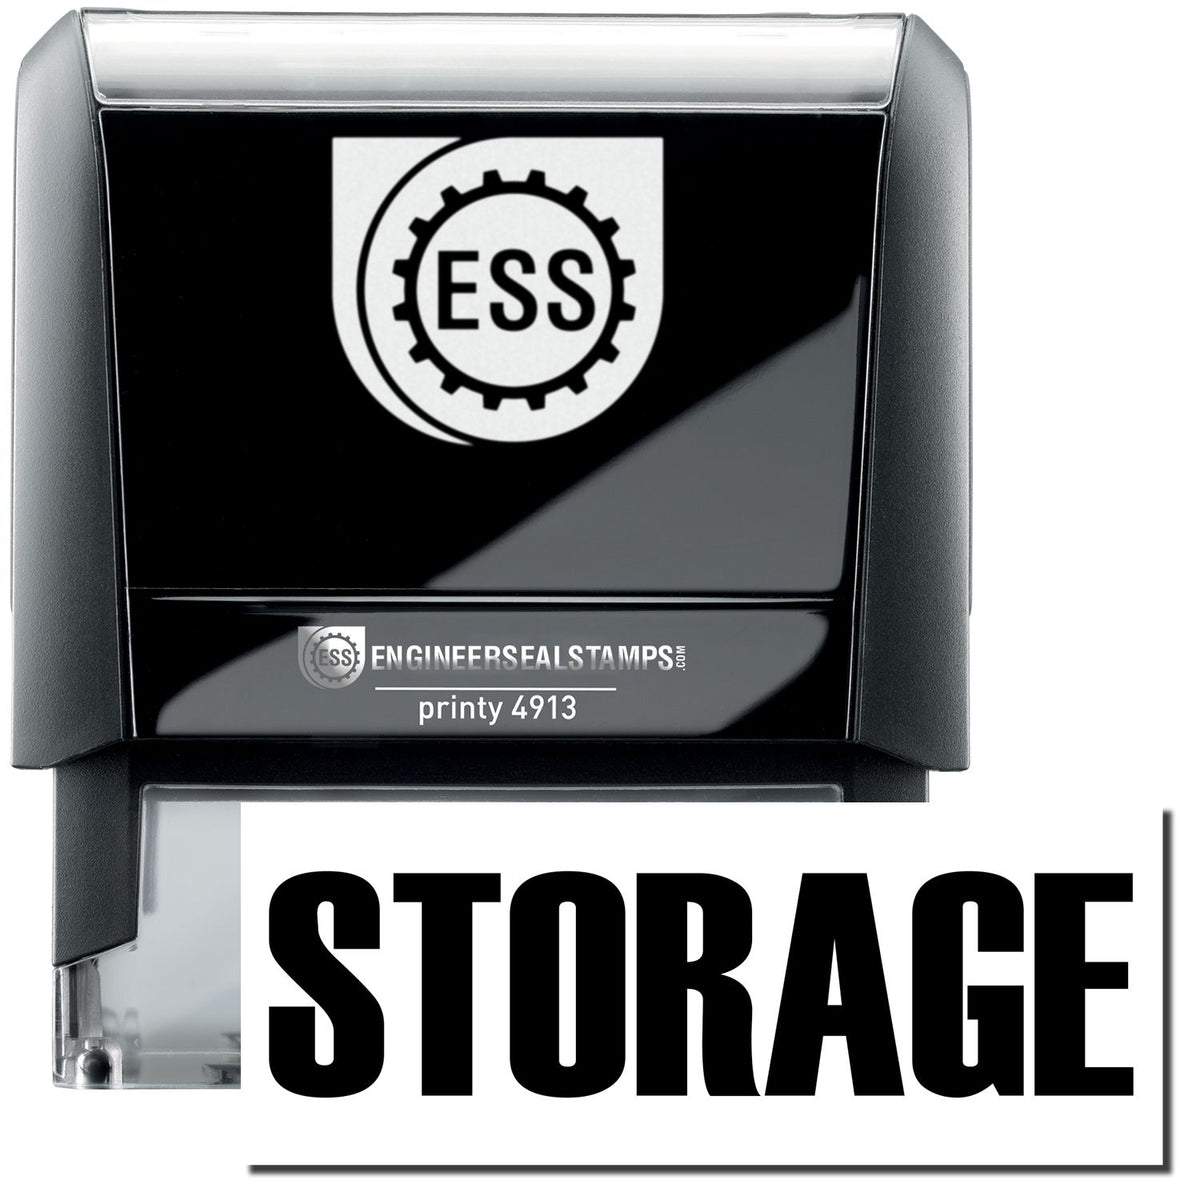 A self-inking stamp with a stamped image showing how the text &quot;STORAGE&quot; in a large bold font is displayed by it.